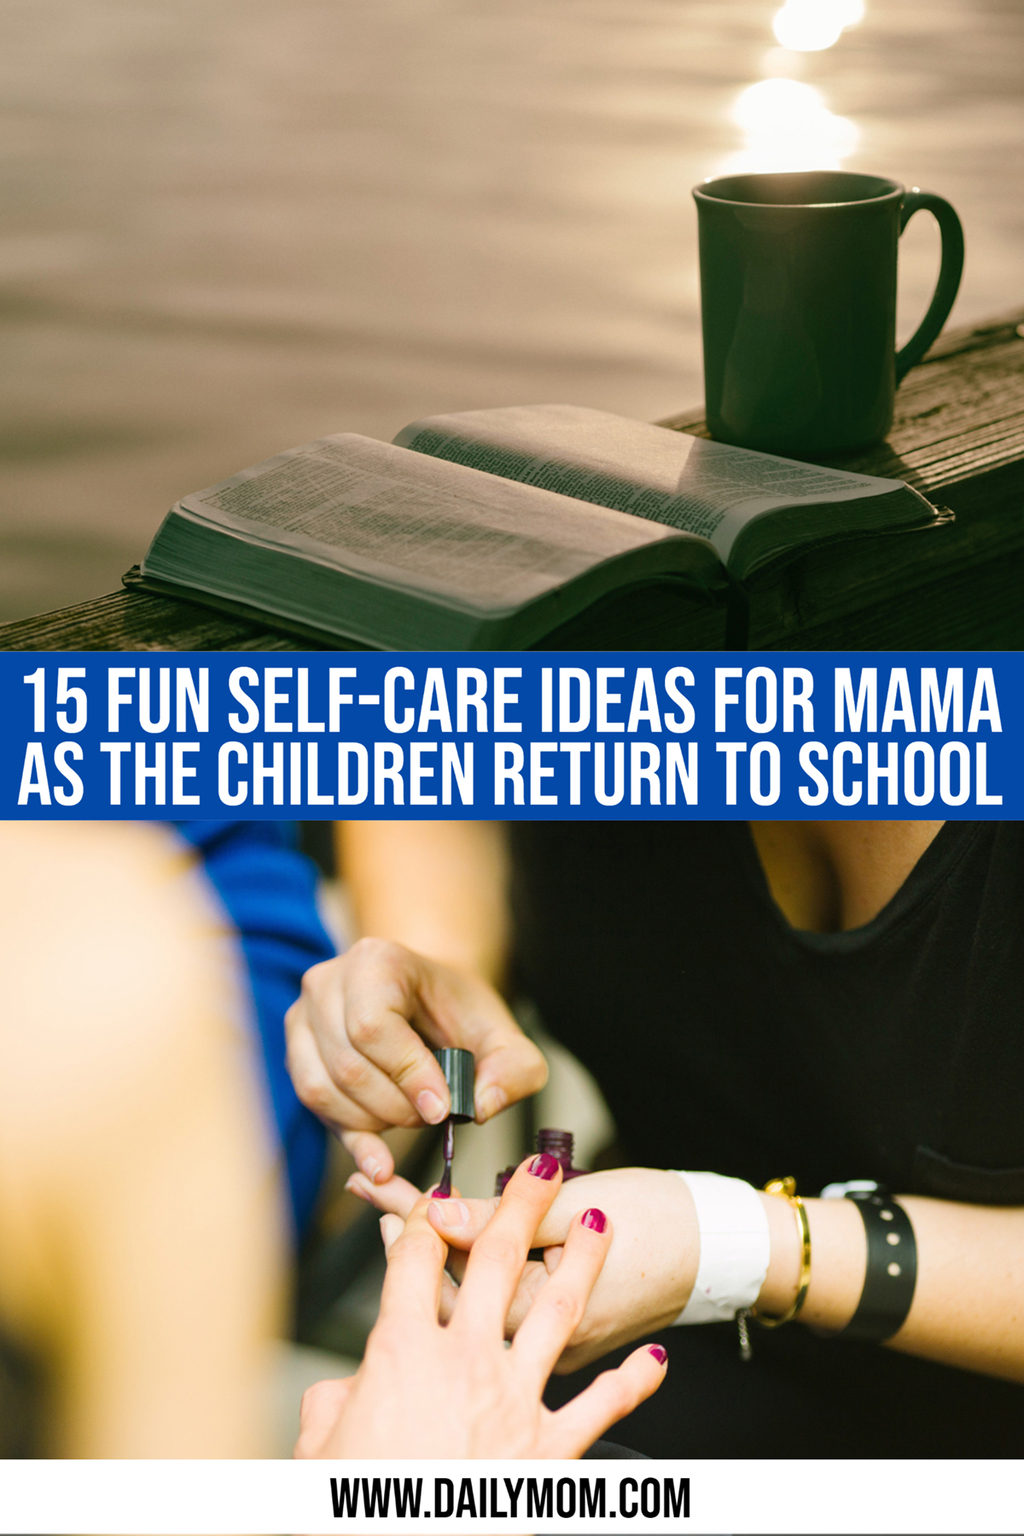 15 Fun & Exciting Self-Care Ideas For Mama As The Children Return To School